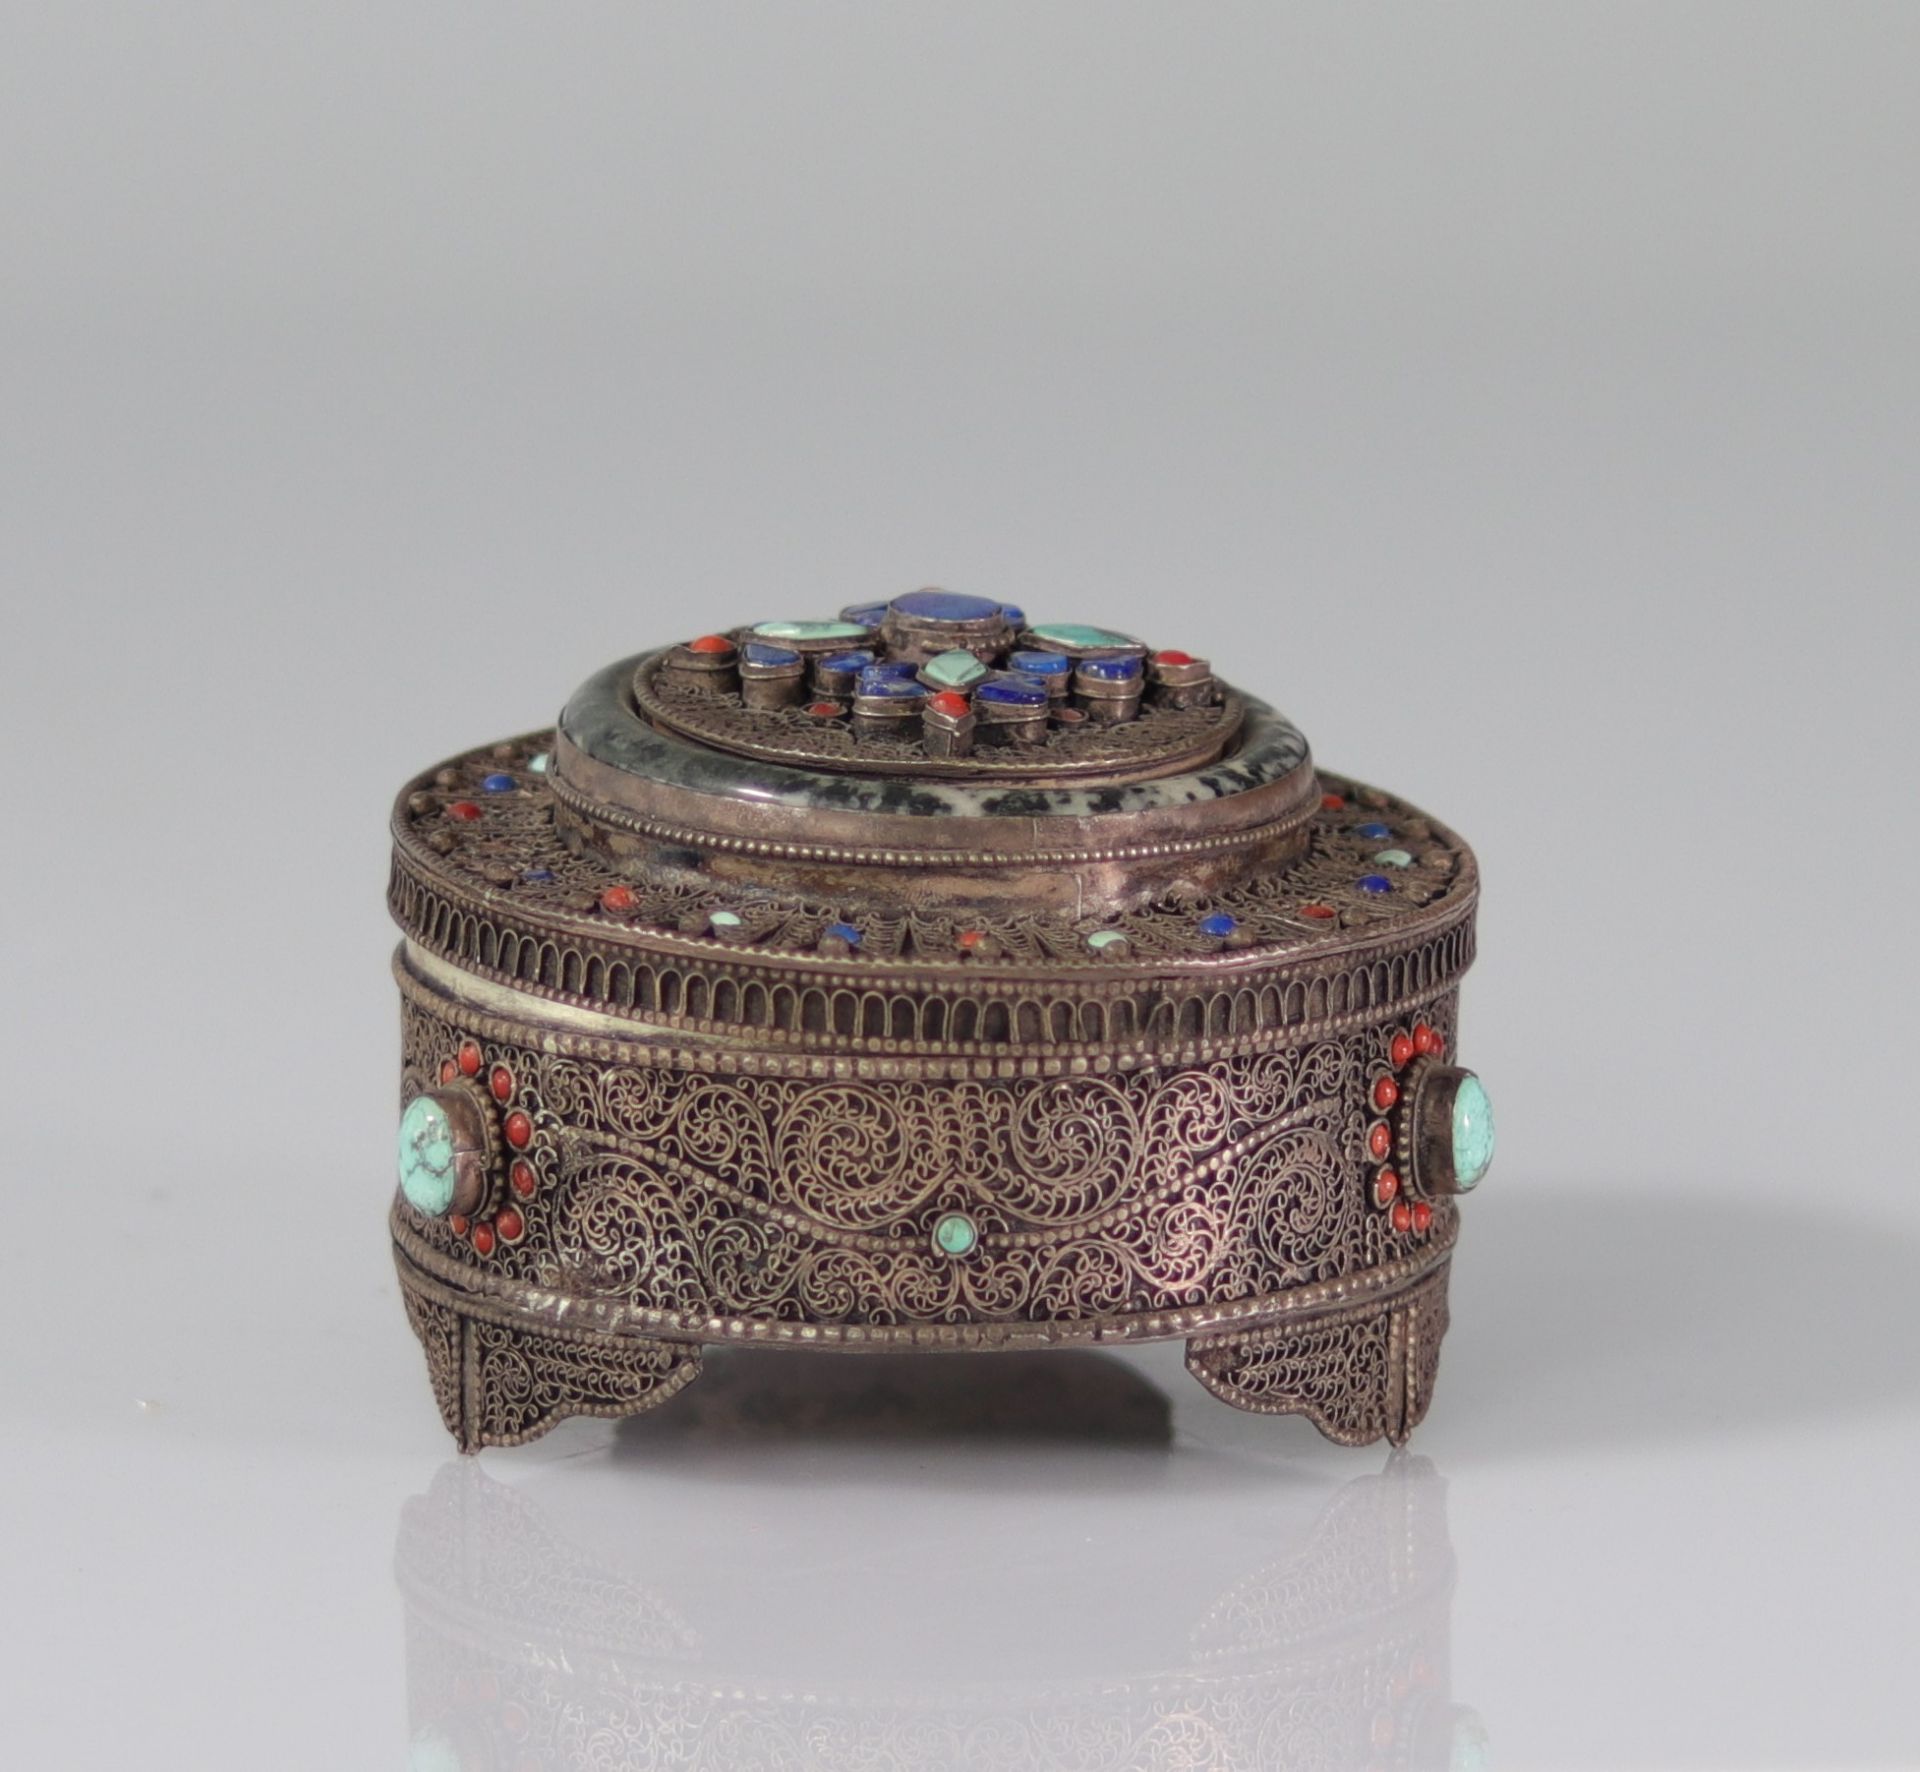 Sino-Tibetan silver box decorated with turquoise stones 19th century - Image 3 of 3